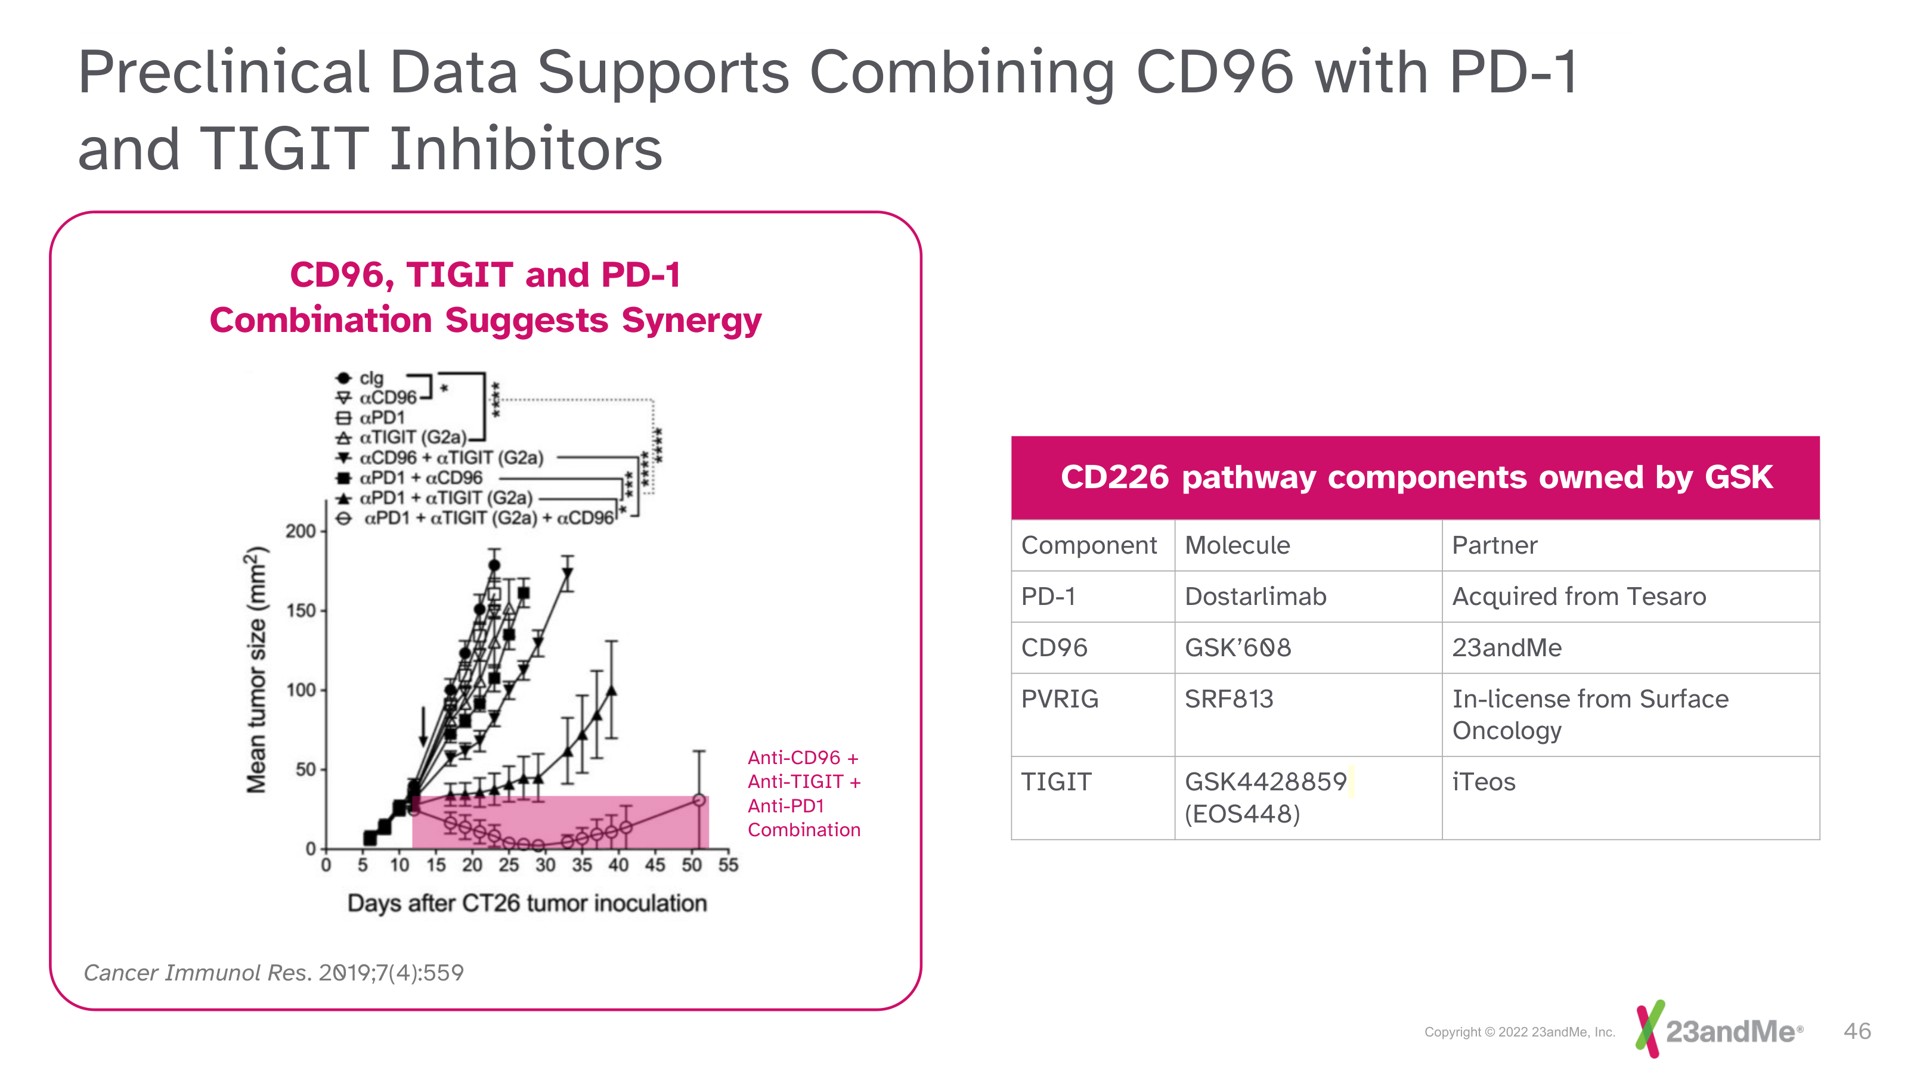 preclinical data supports combining with and inhibitors | 23andMe